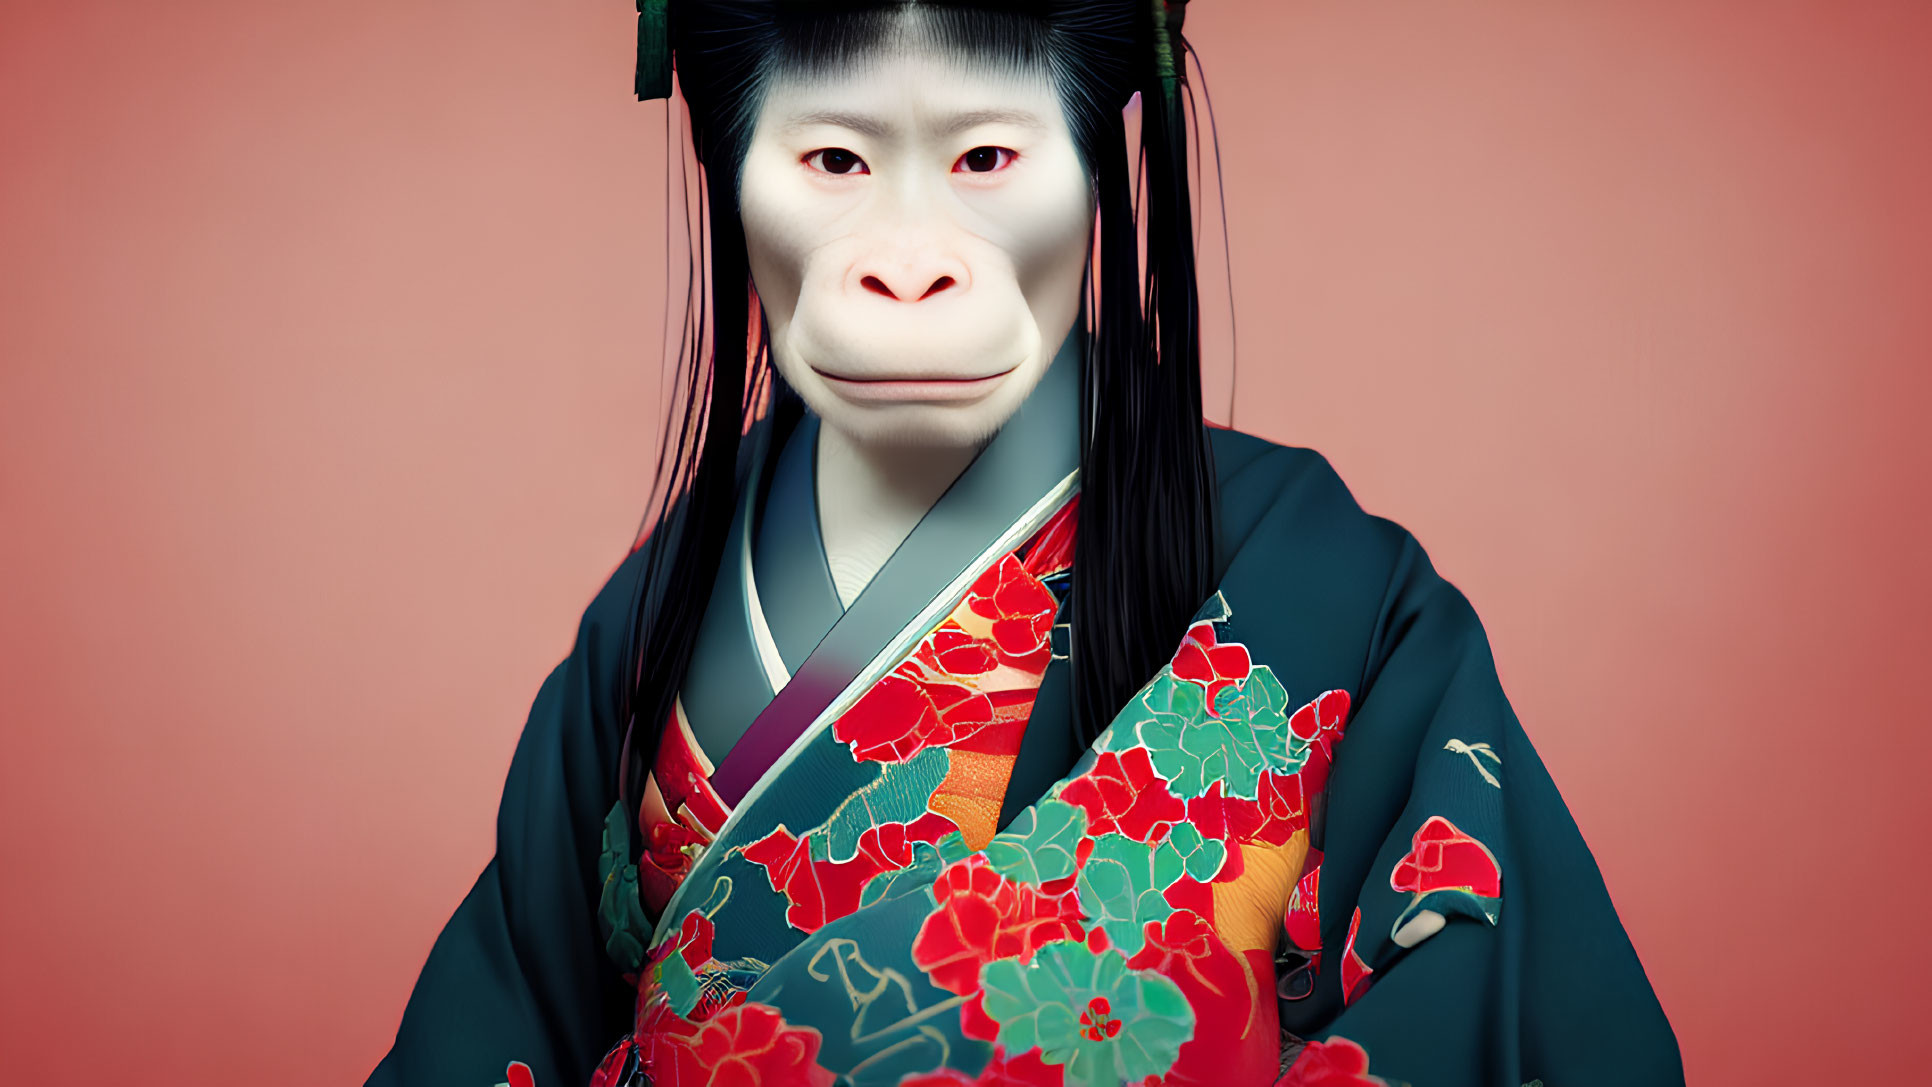 Digital art: Monkey face on human body in kimono with floral patterns on red background